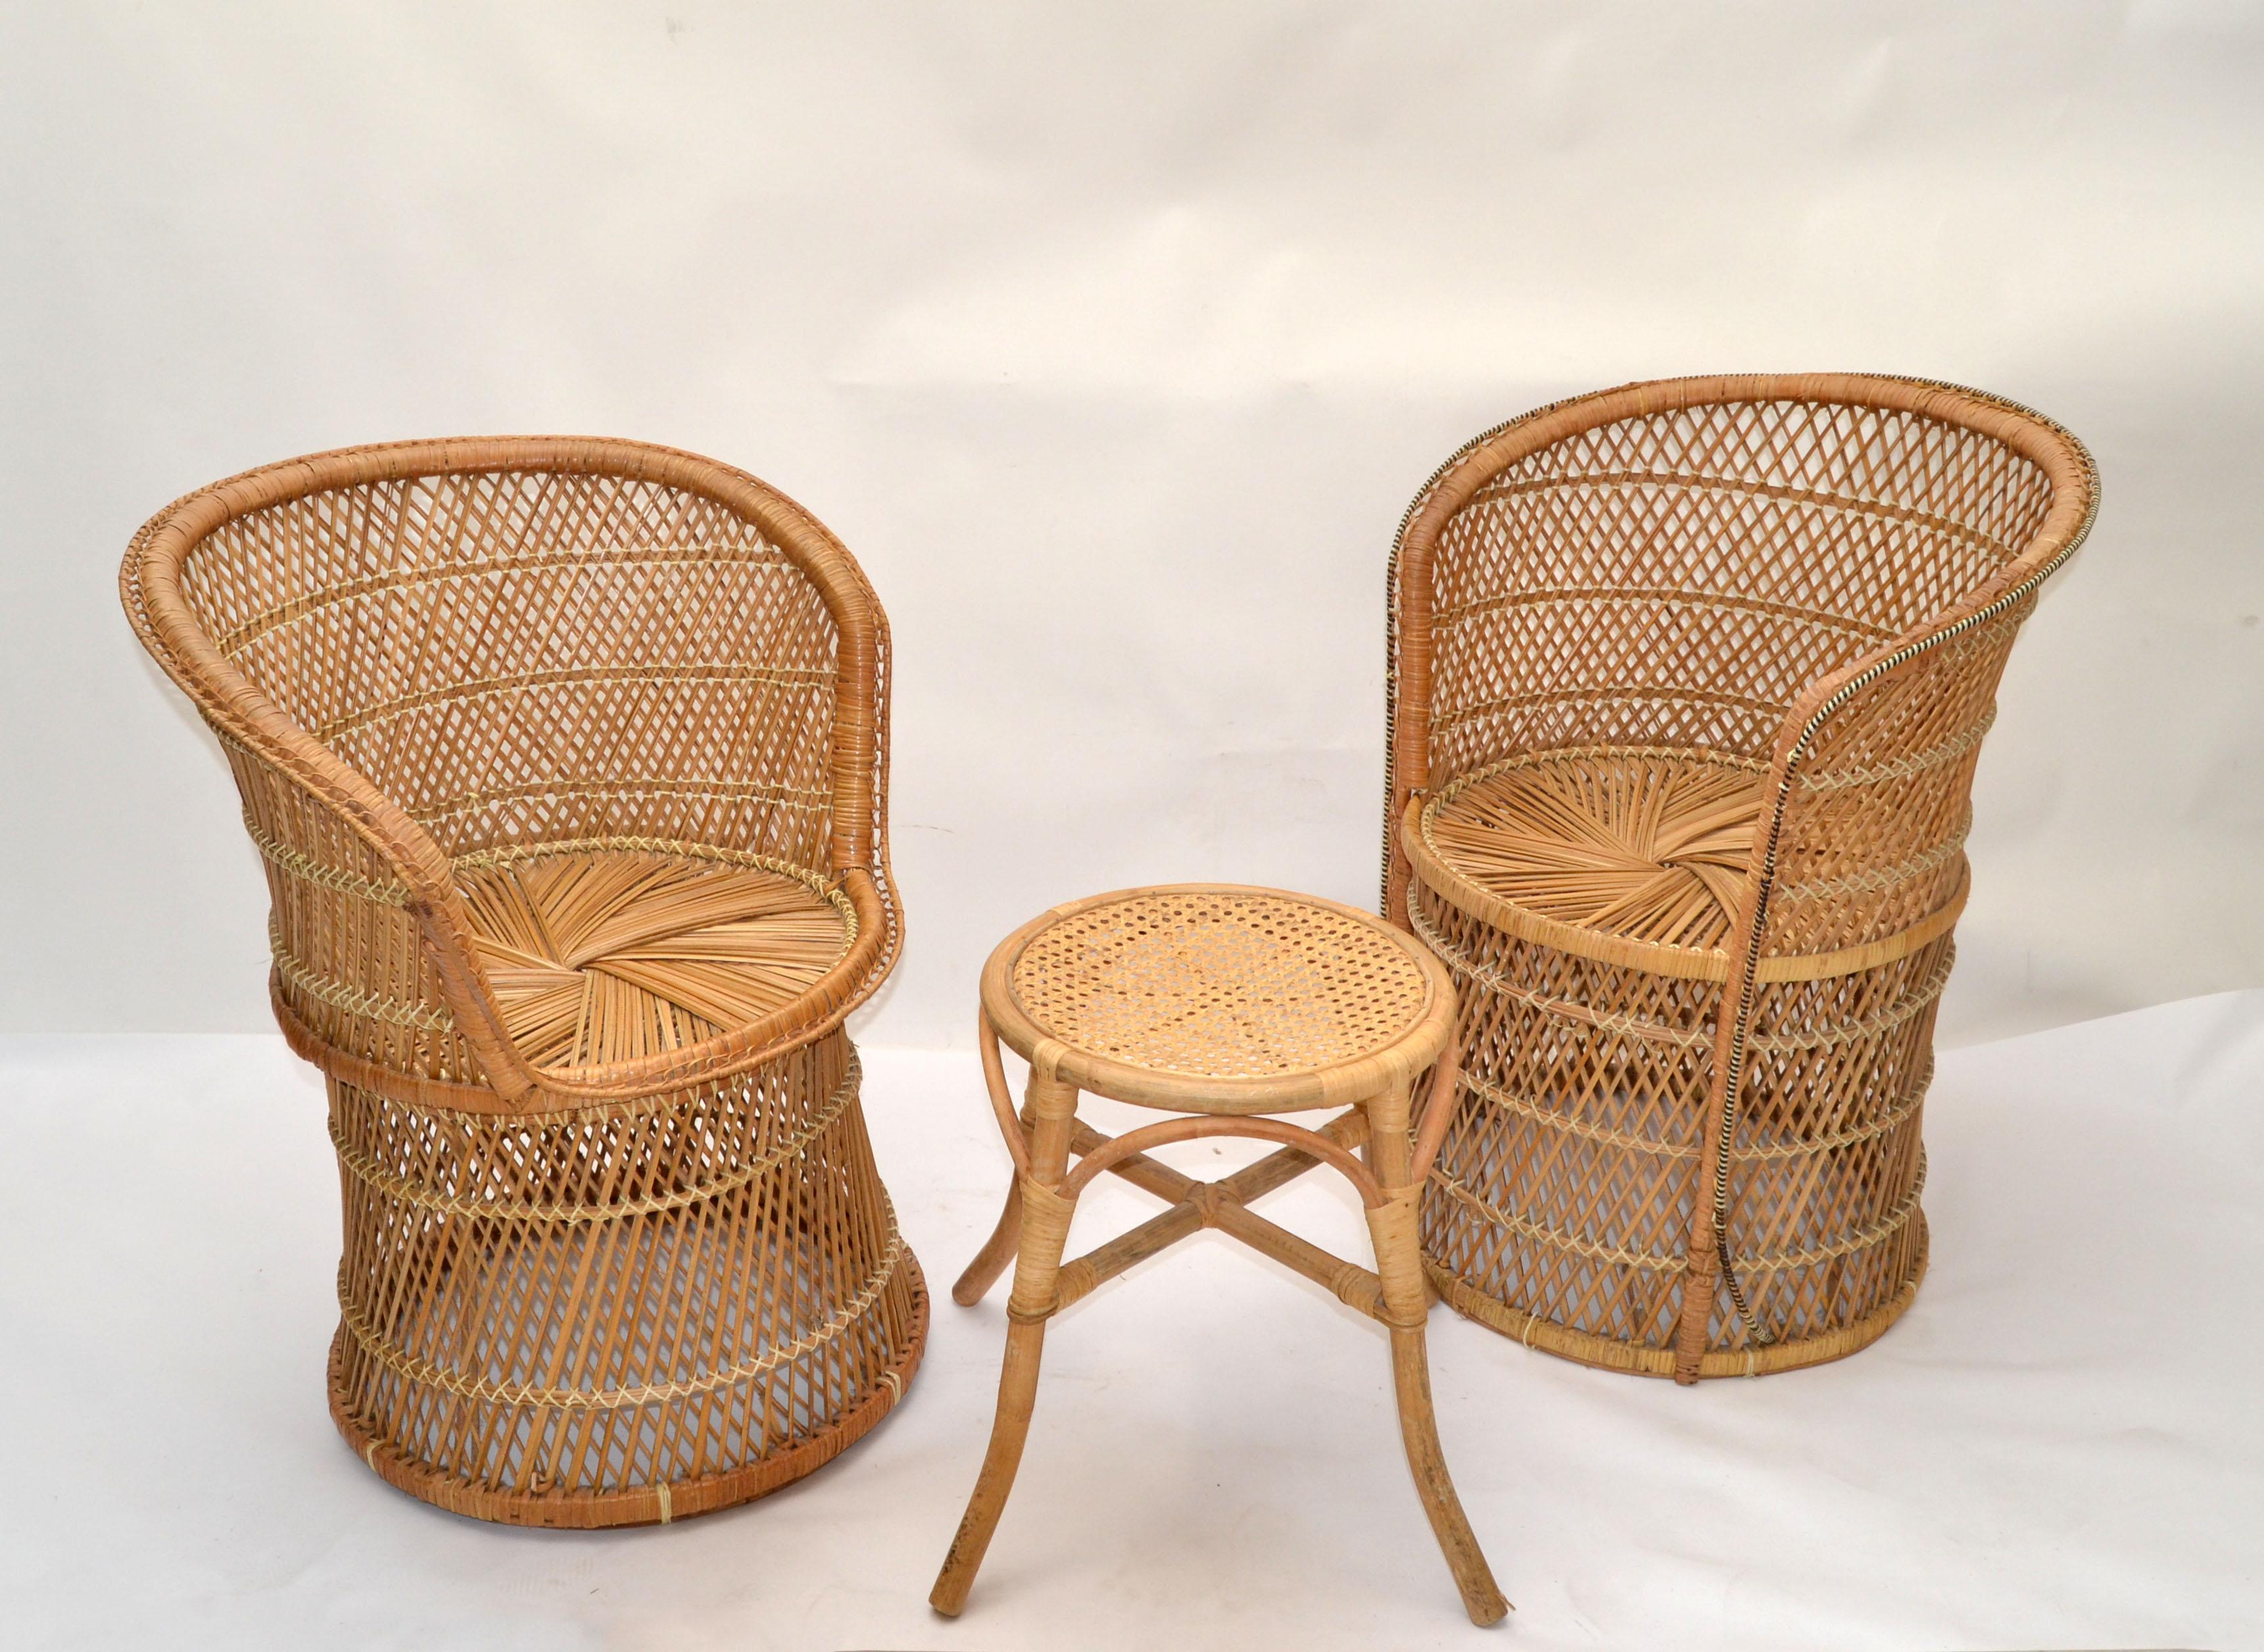 20th Century Him & Her Vintage Handwoven & Crafted Chinoiserie Rattan Cane & Bamboo Armchairs For Sale